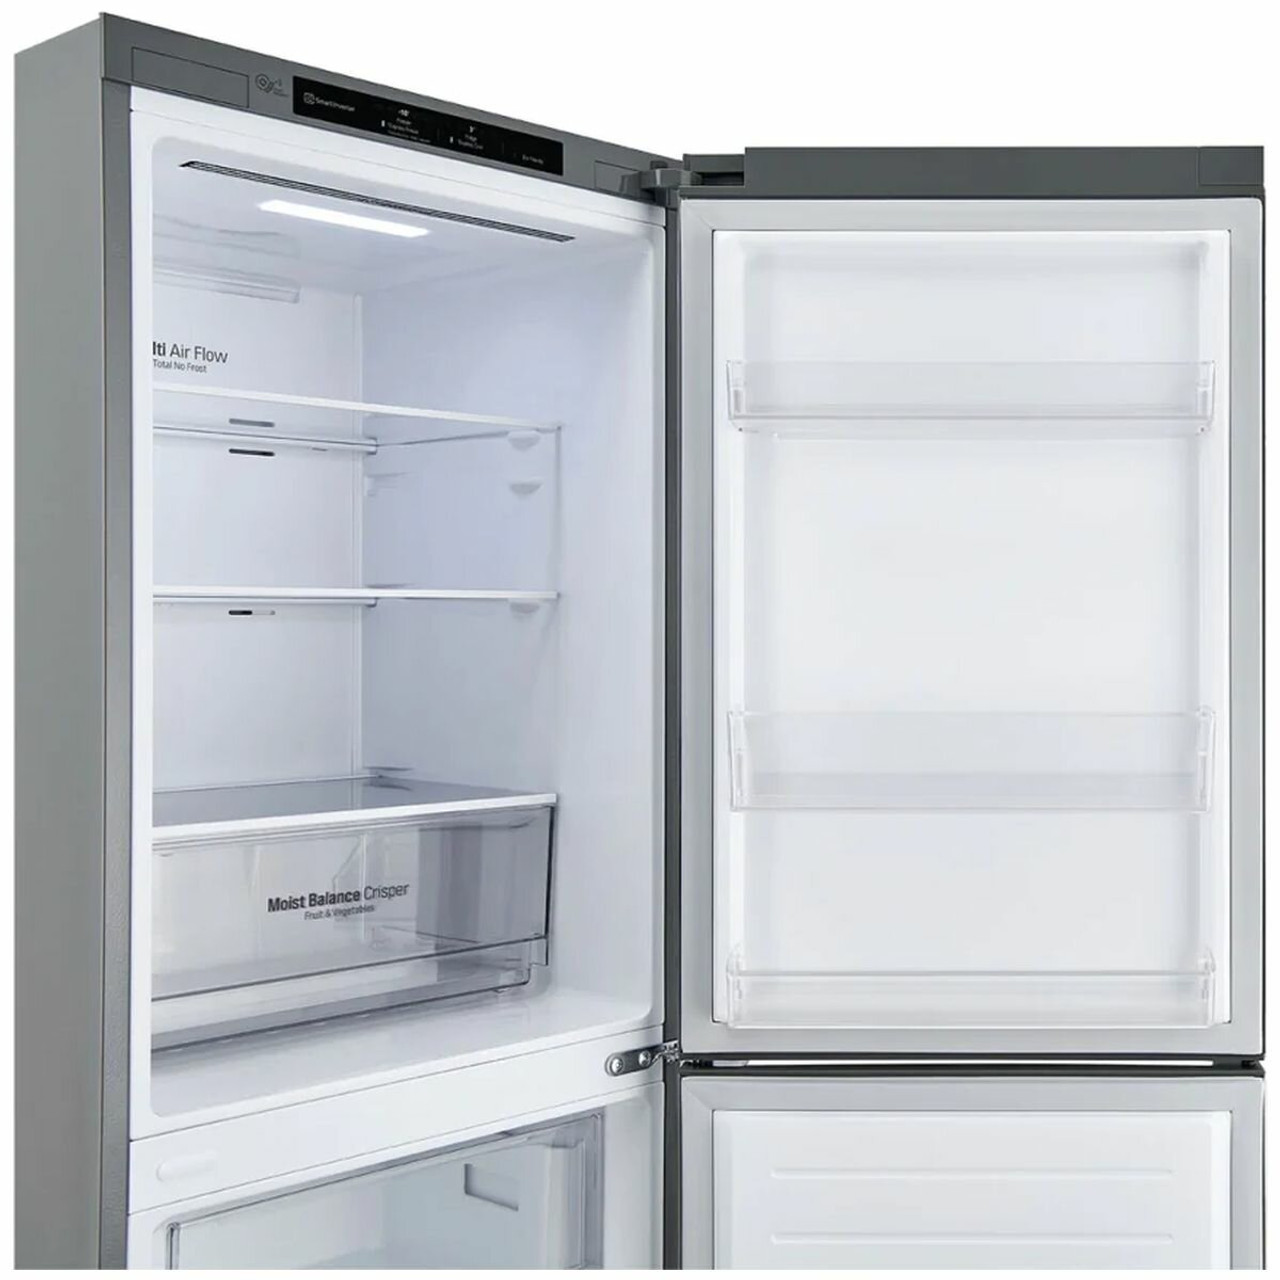 GB335PL - 335L Bottom Mount Fridge with Door Cooling - Stainless Steel